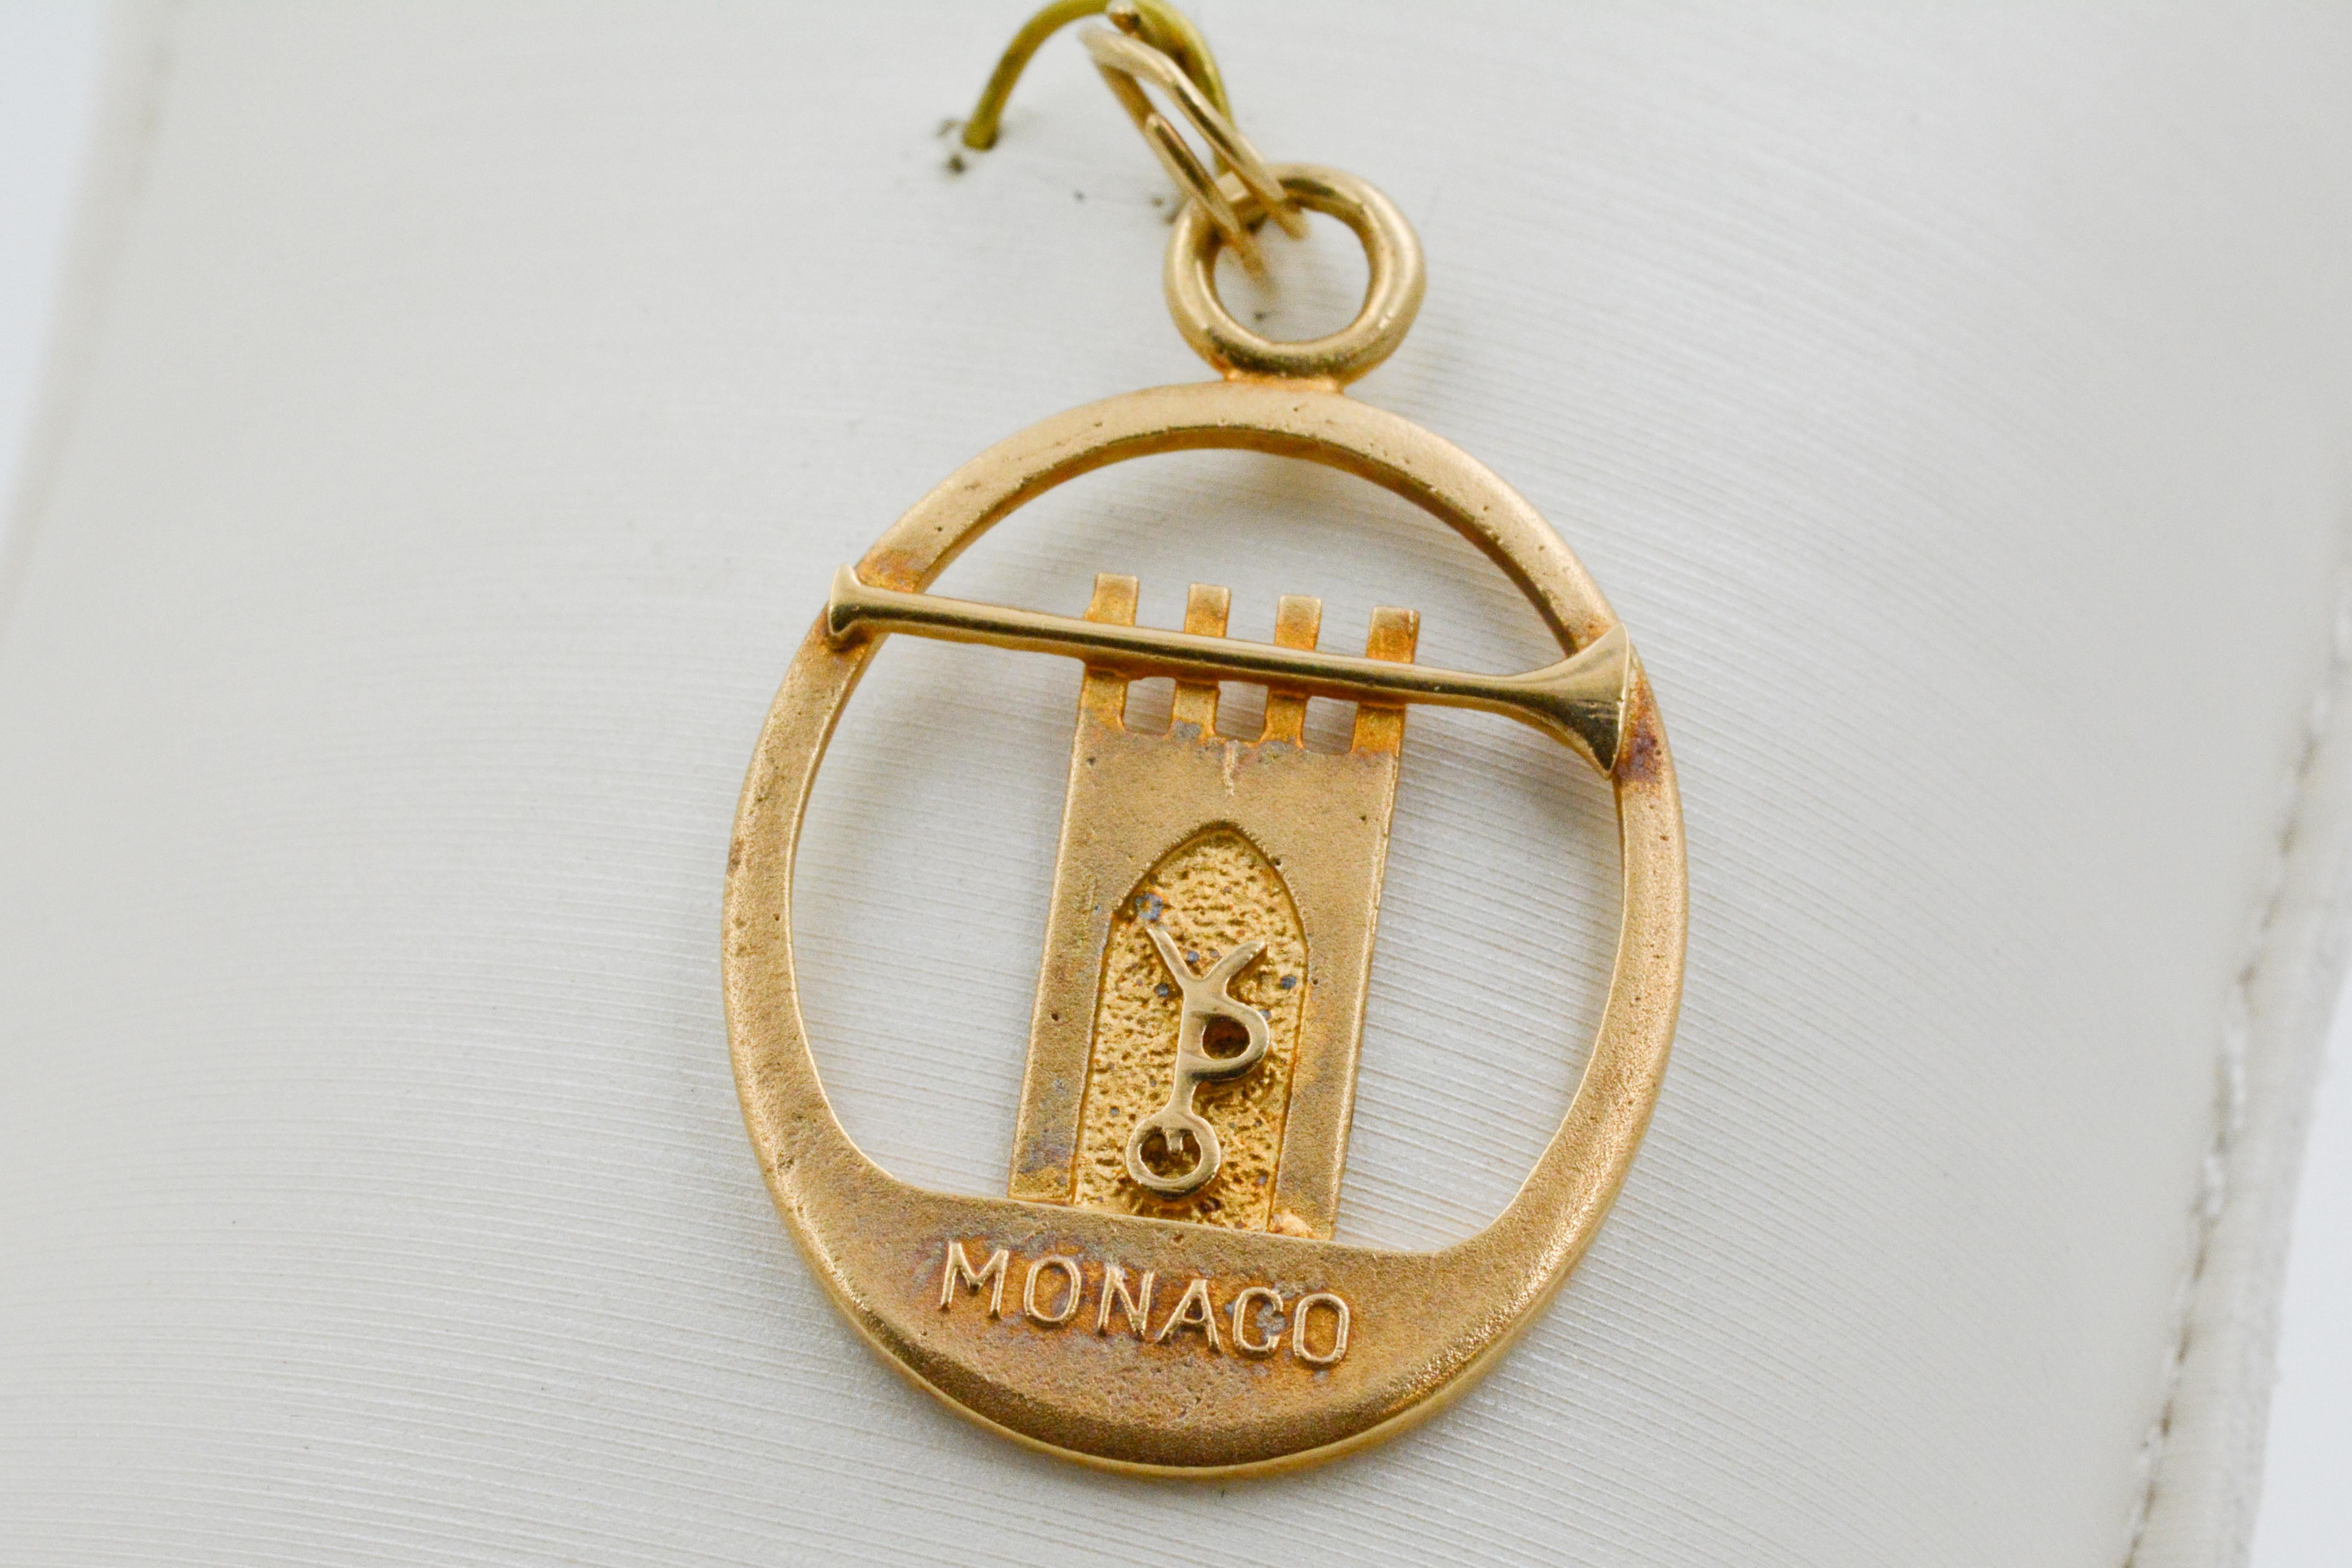 This regal charm is fashioned from 14kt yellow gold and features a cutout of a castle image with the letters “YPO” embossed on the doorway. A long trumpet plays across the top, and the word “Monaco” is embossed at the bottom. The back of the charm